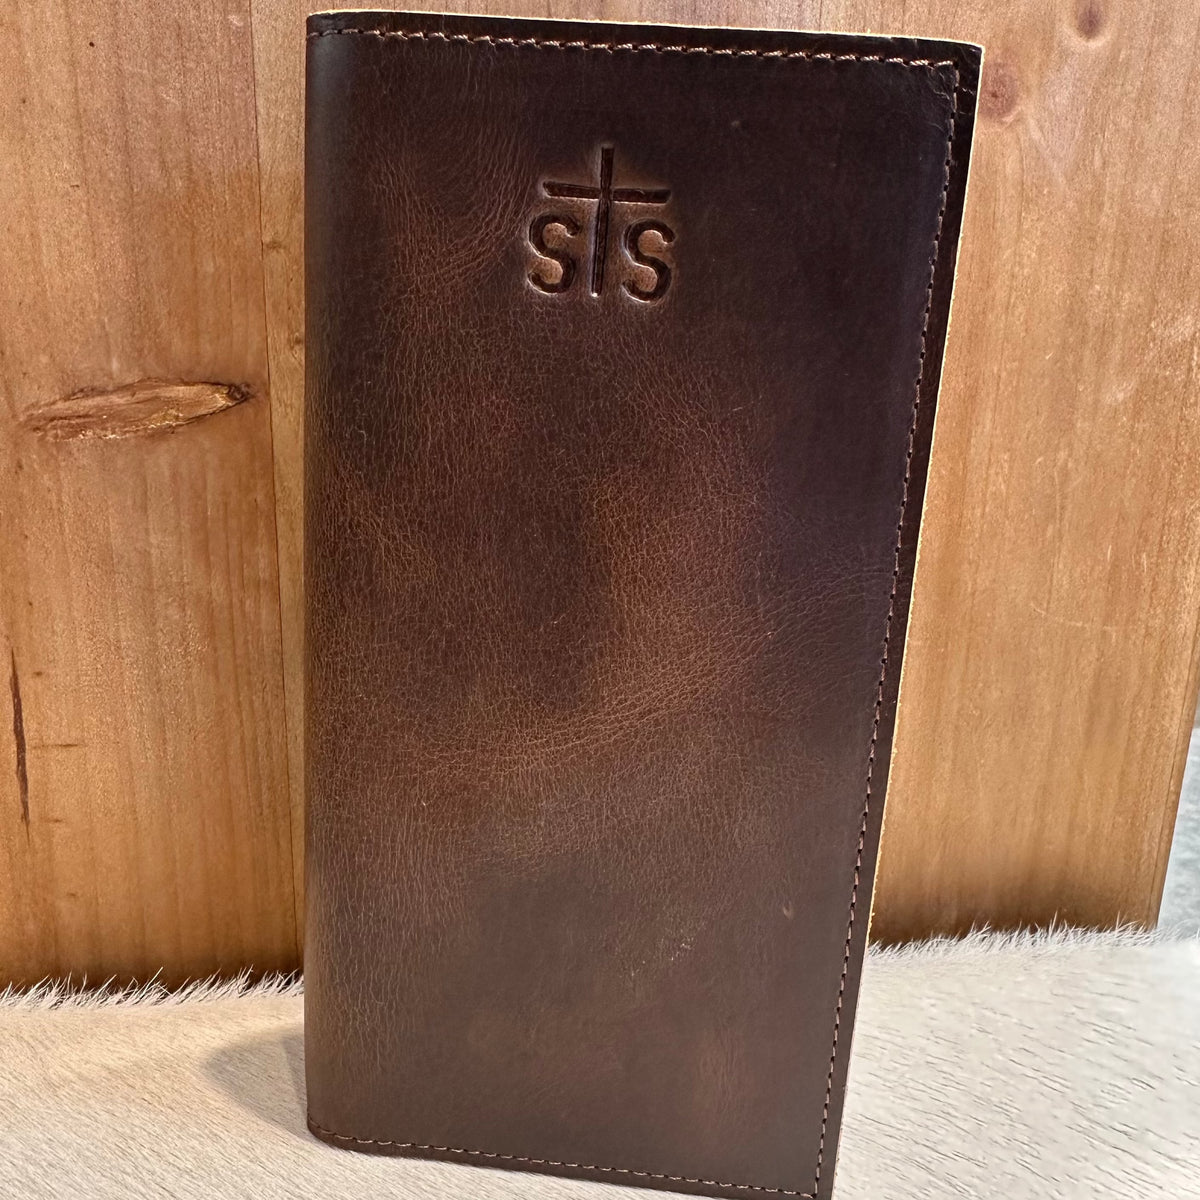 STS Ranchwear Tuscon Brown Leather Long Bifold